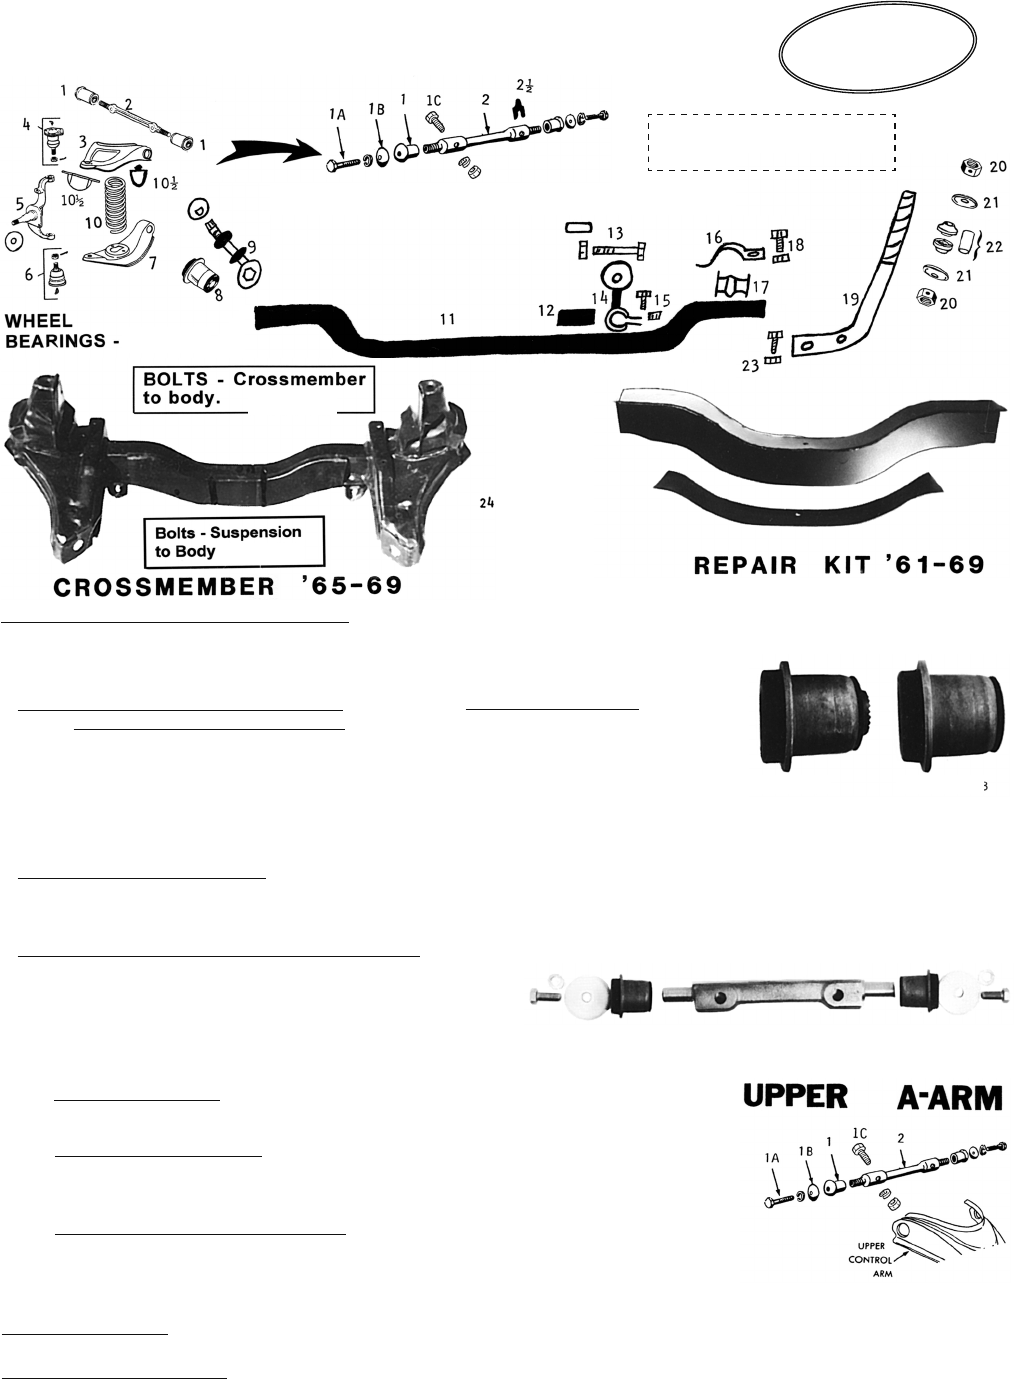 Inc. - Corvair Parts Catalog - Over parts - pg 153